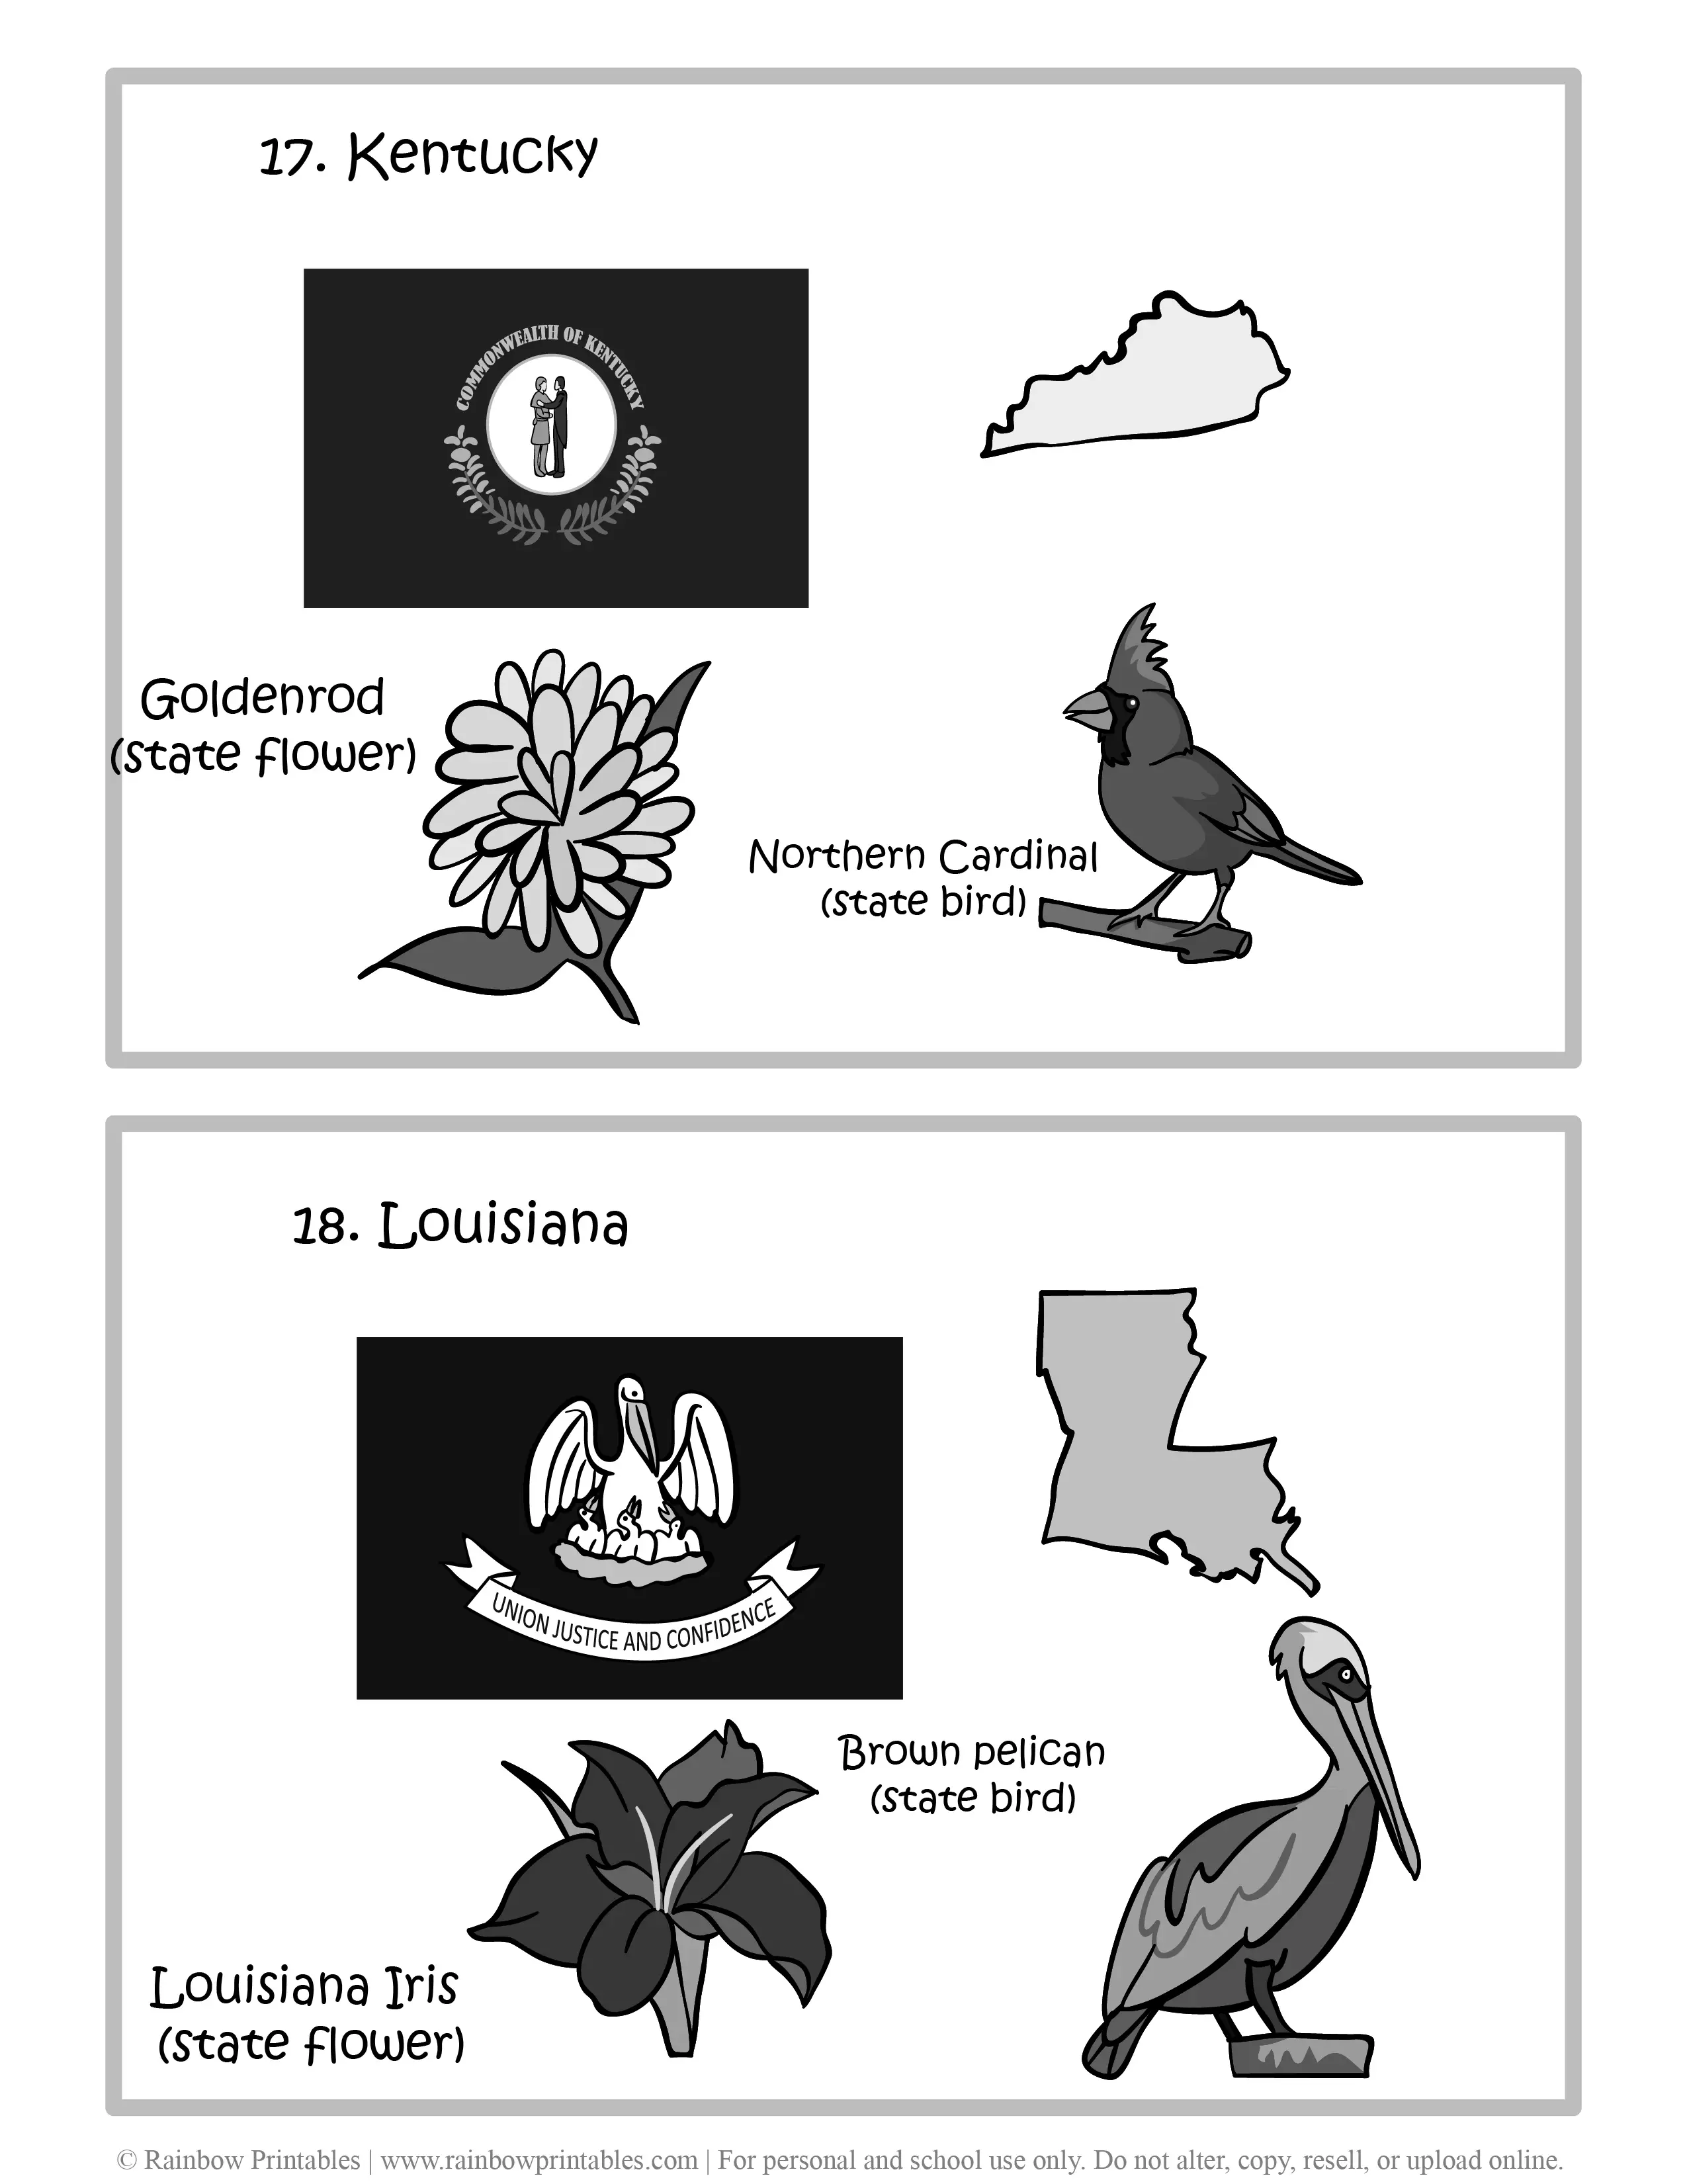 Kentucky, Louisiana, 50 US State Flag, State Bird, State Flower, United States of America - American States Geography Worksheet Class Lesson Printables Flashcards Black White